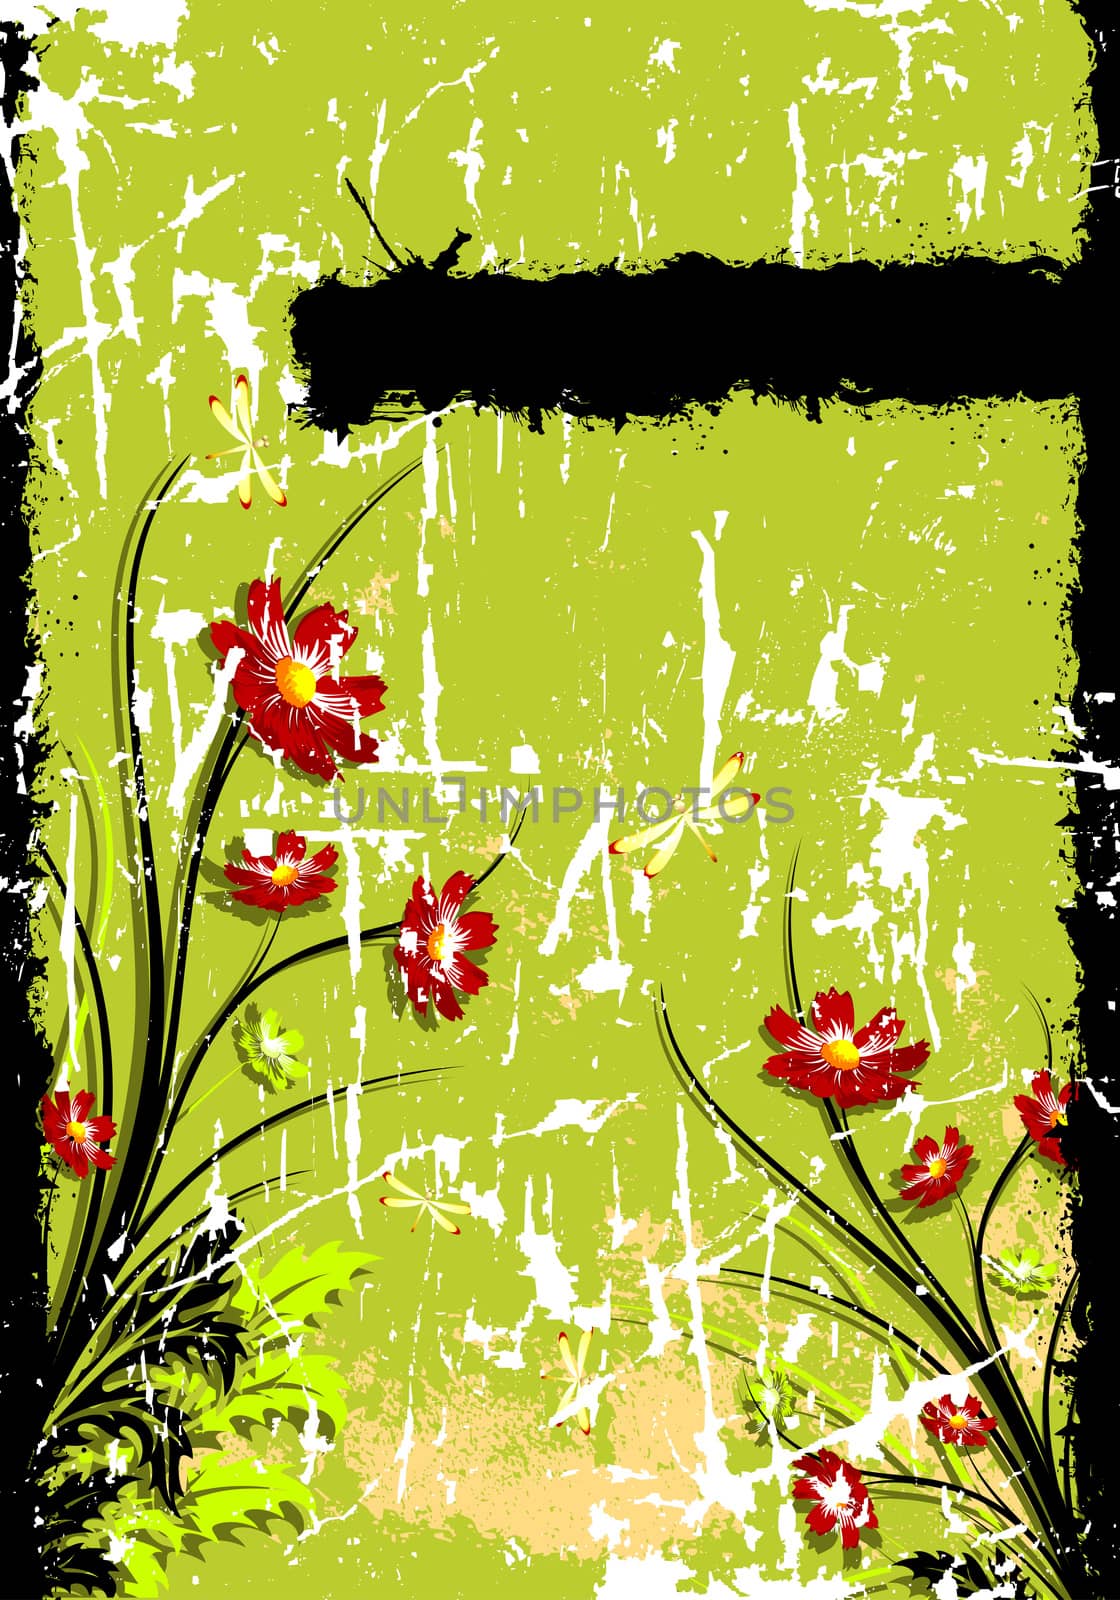 Abstract Grunge Floral Background by WaD